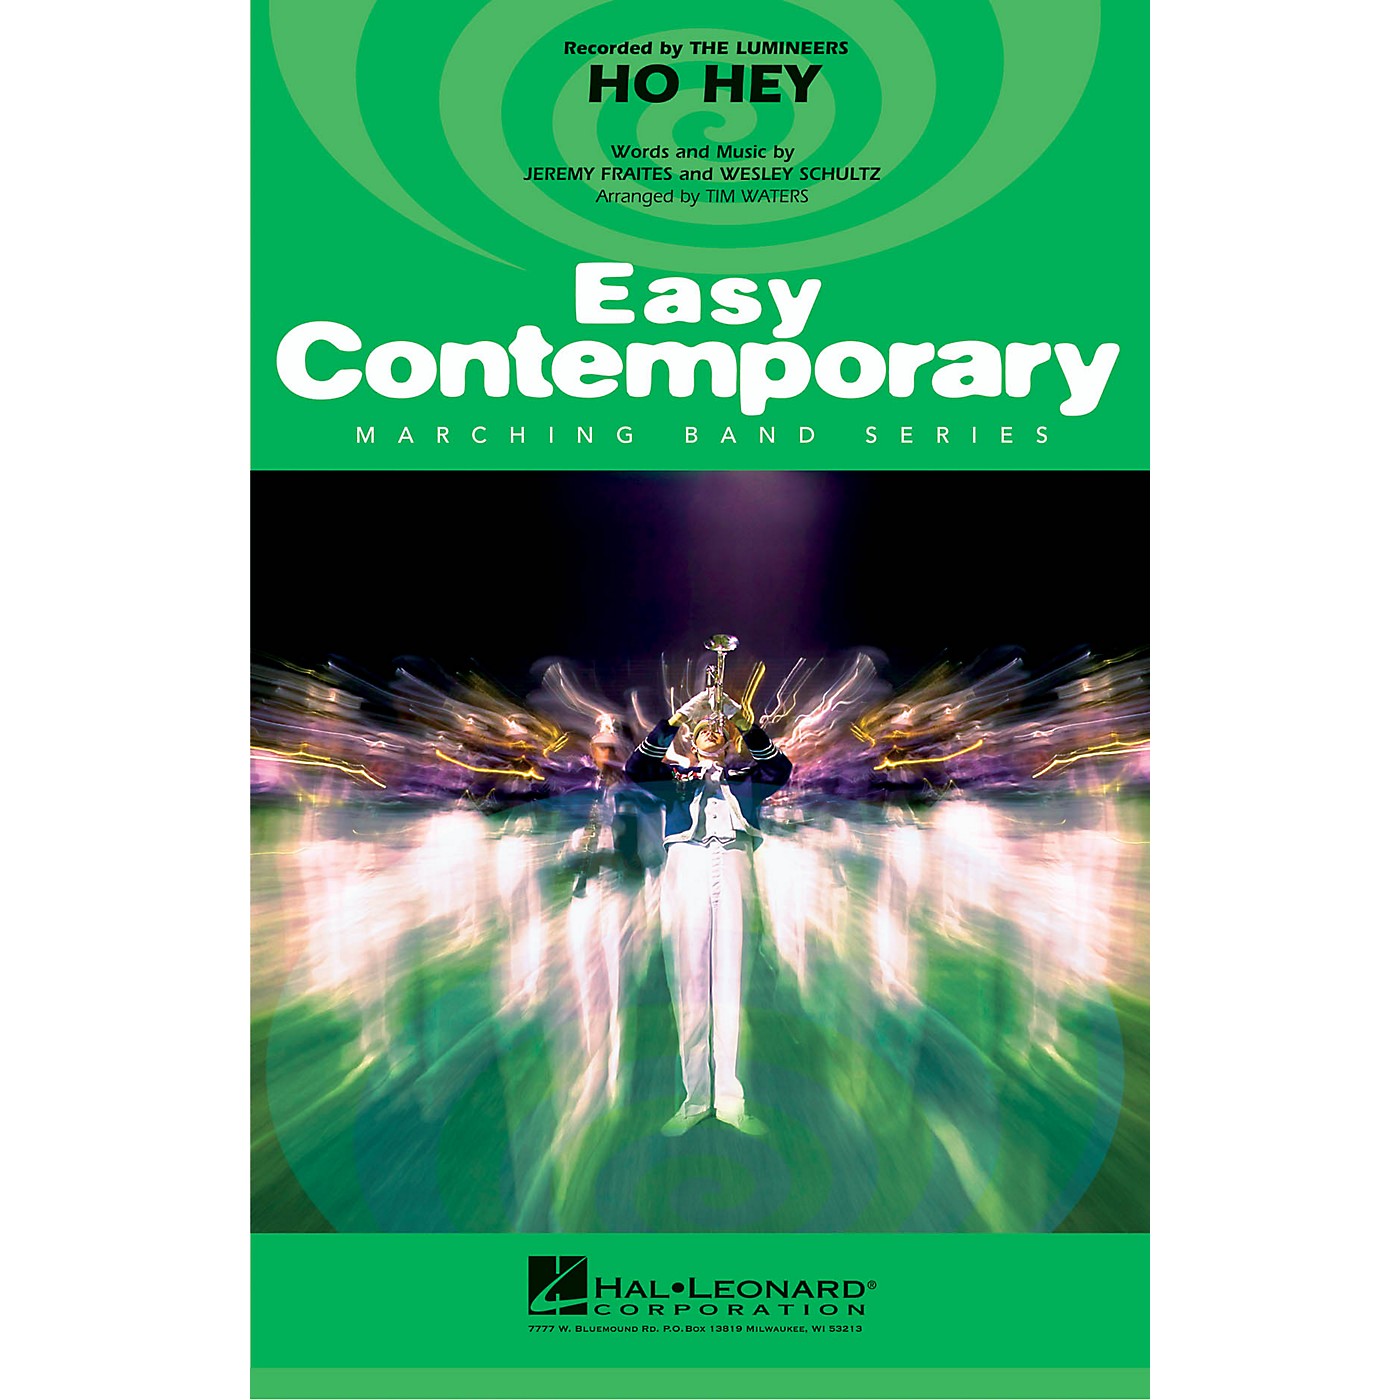 Hal Leonard Ho Hey Marching Band Level 2-3 by The Lumineers Arranged by Tim Waters thumbnail